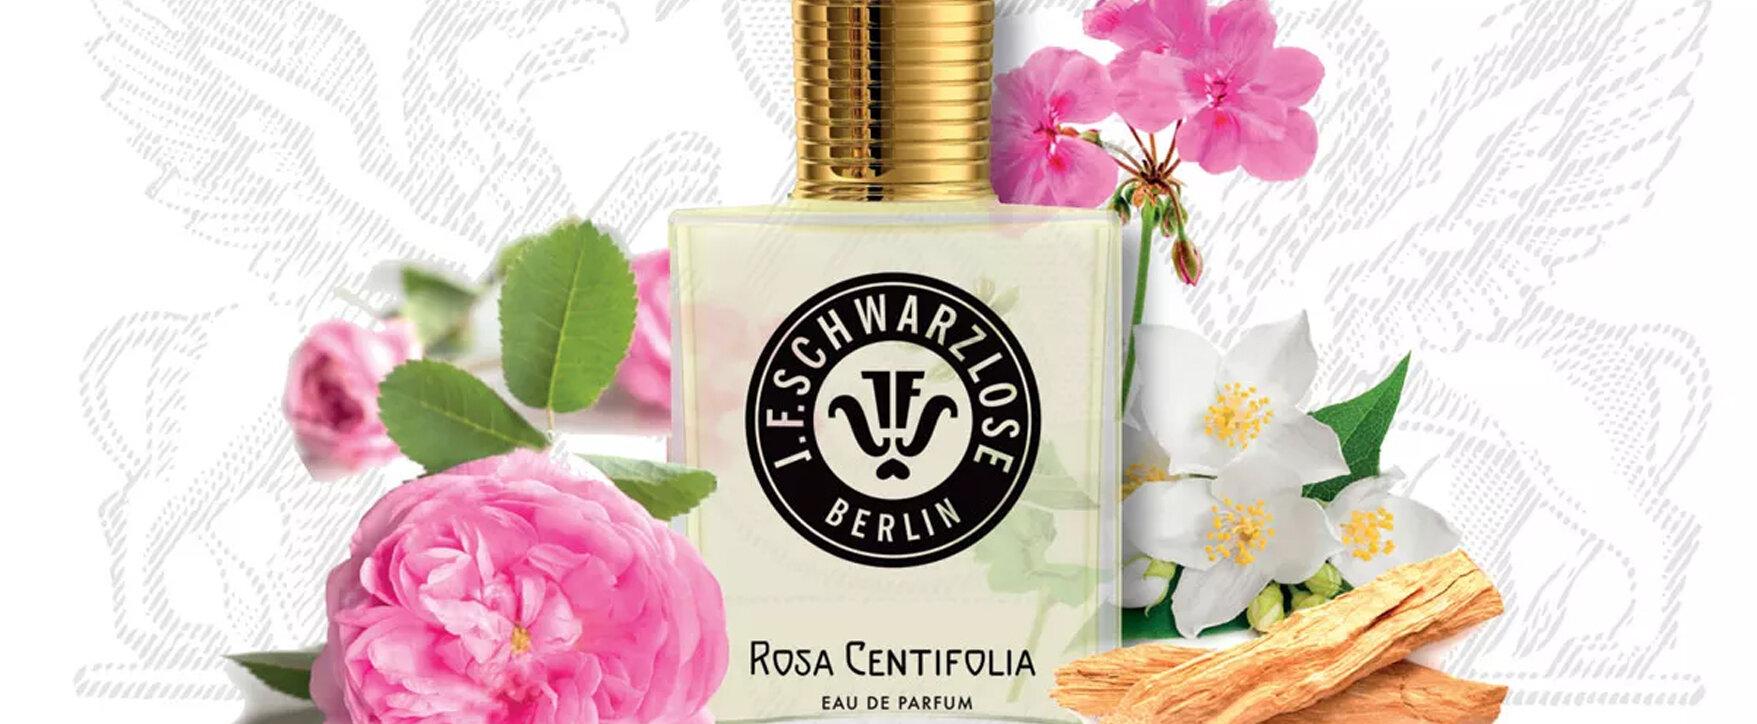 “Rosa Centifolia” - J.F. Schwarzlose Berlin Introduces New Edition of the Classic Rose Fragrance